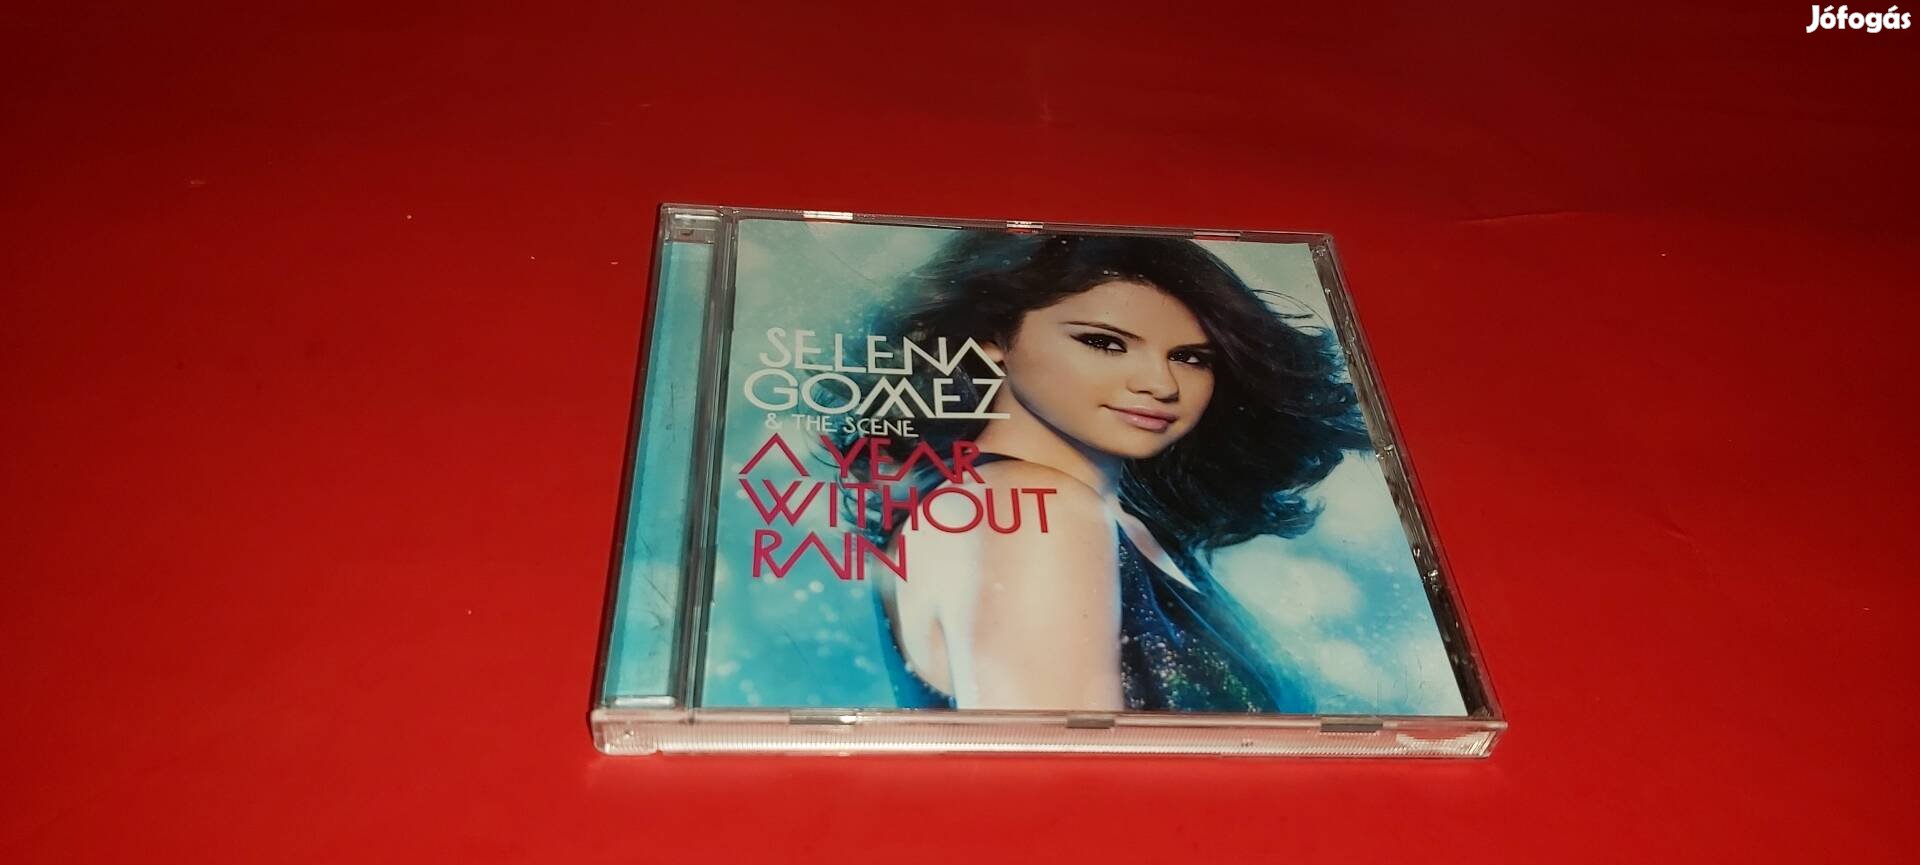 Selena Gomez & The Scene A year without rain Cd 2010